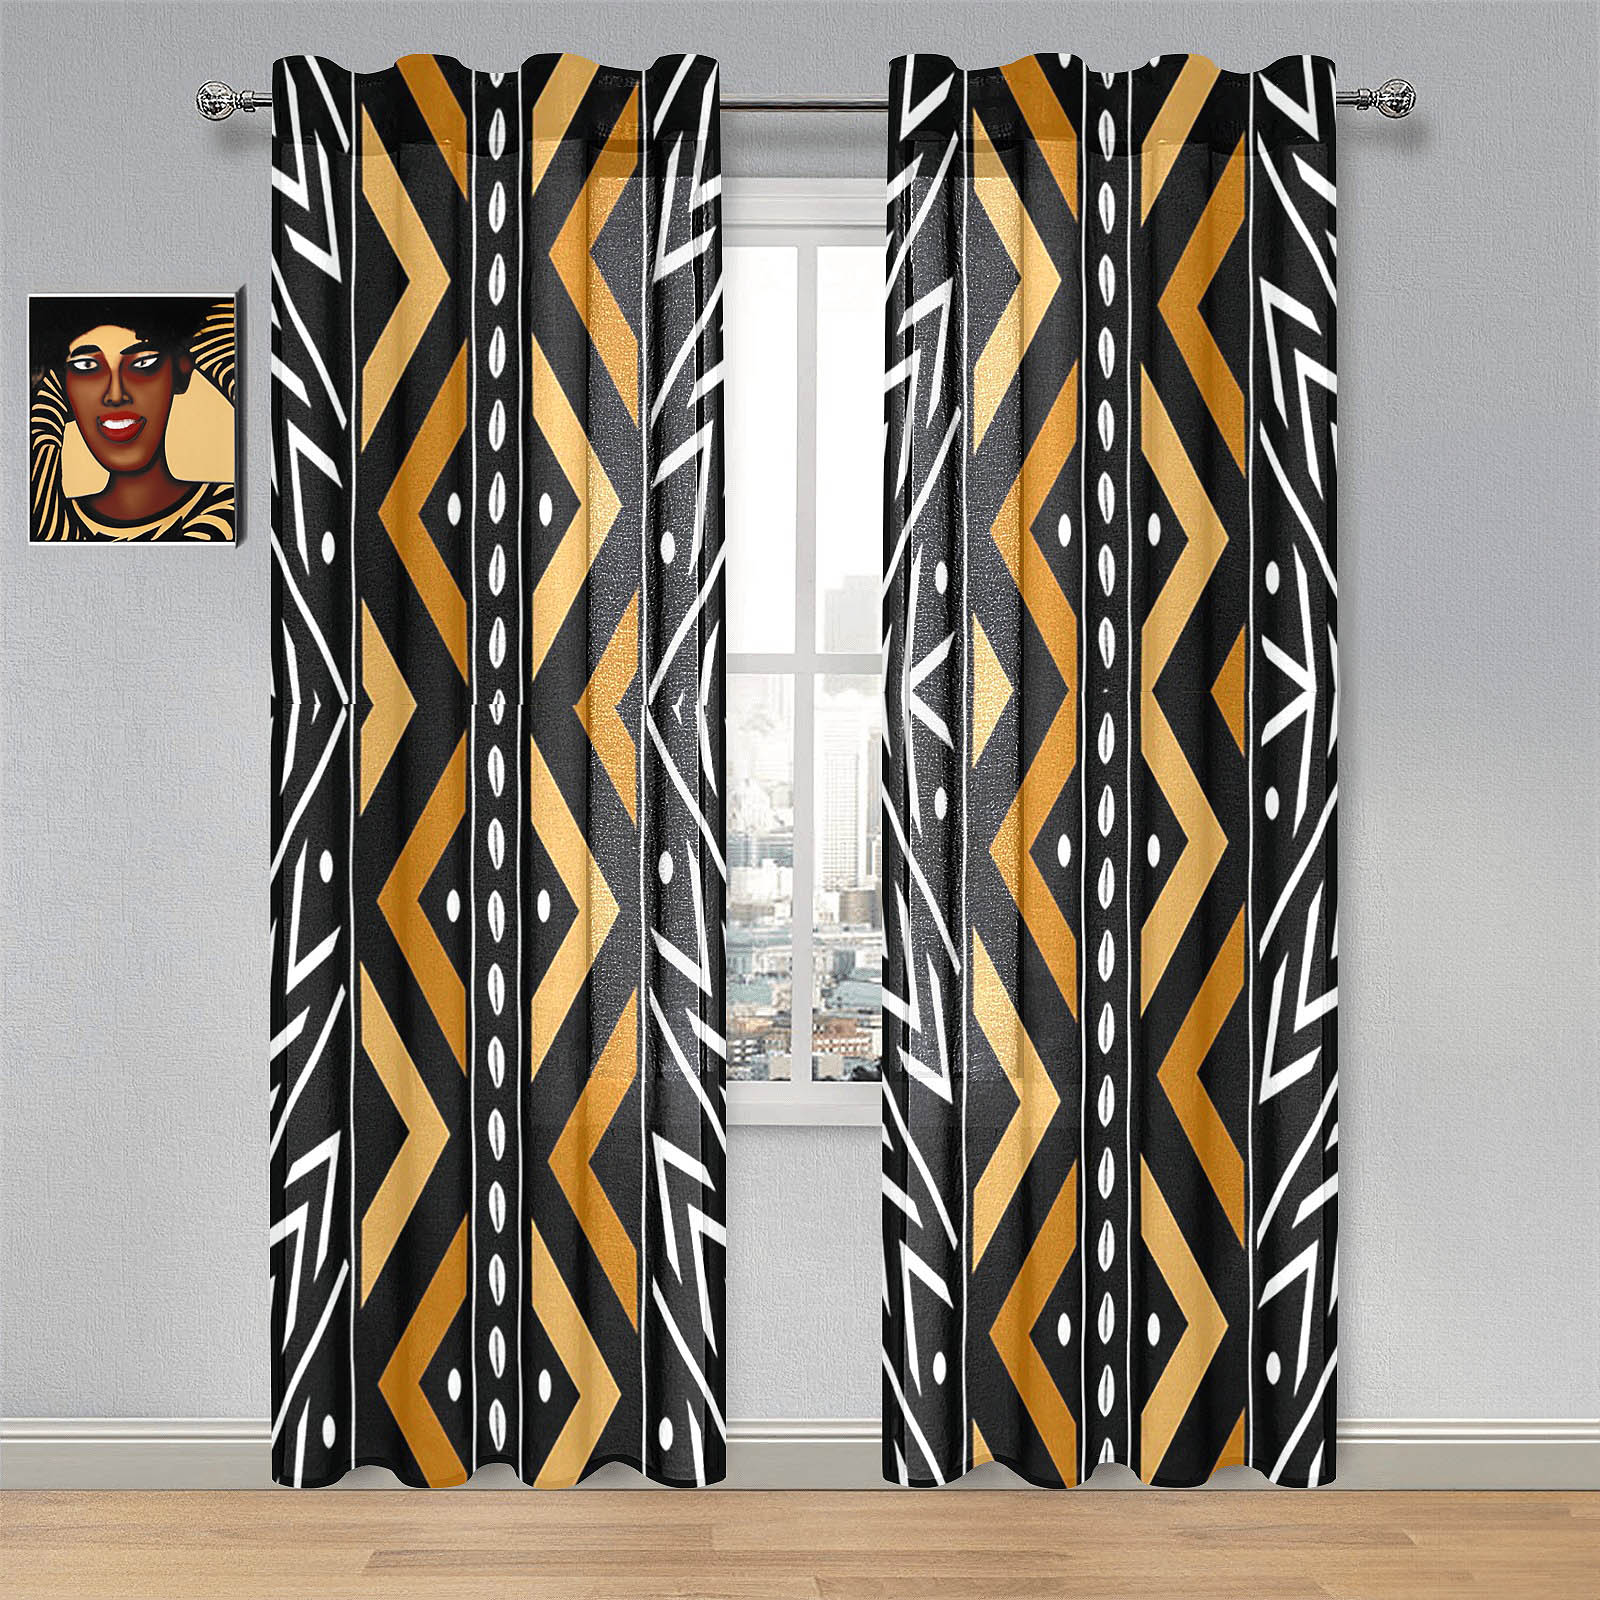 Zigzag African Curtain Tribal Print (Two-Piece